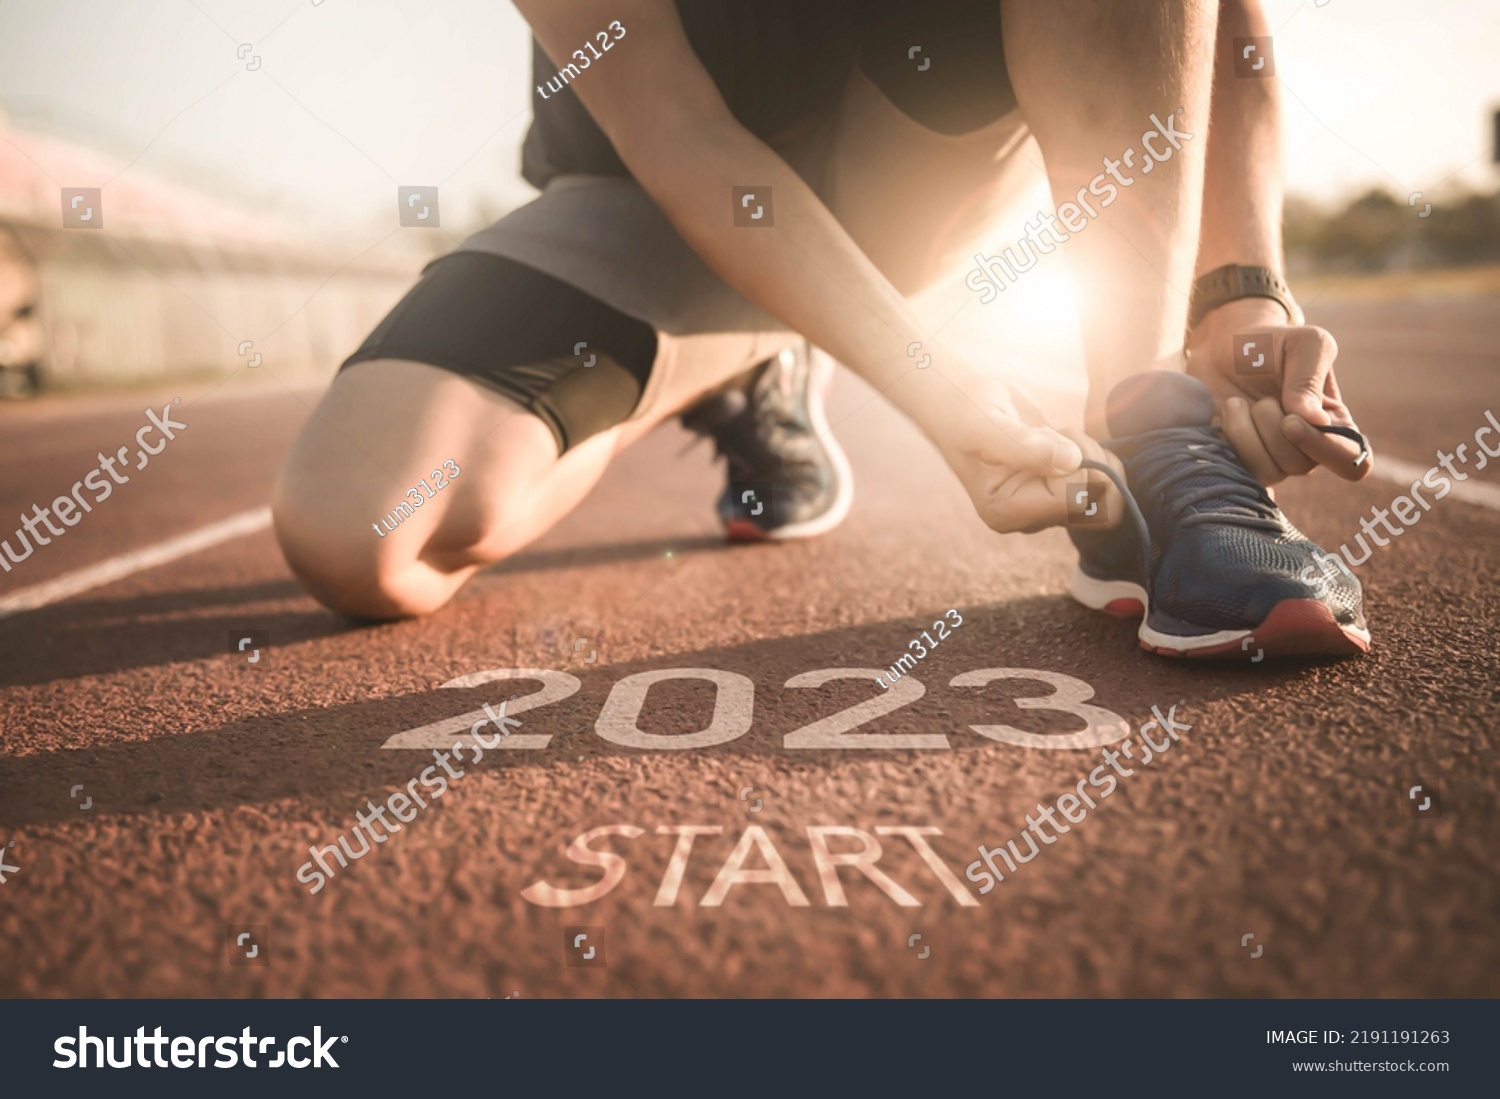 happy new year 2023,2023 symbolises the start into the new year.Start of people running on street,with sunset light.Goal of Success #2191191263